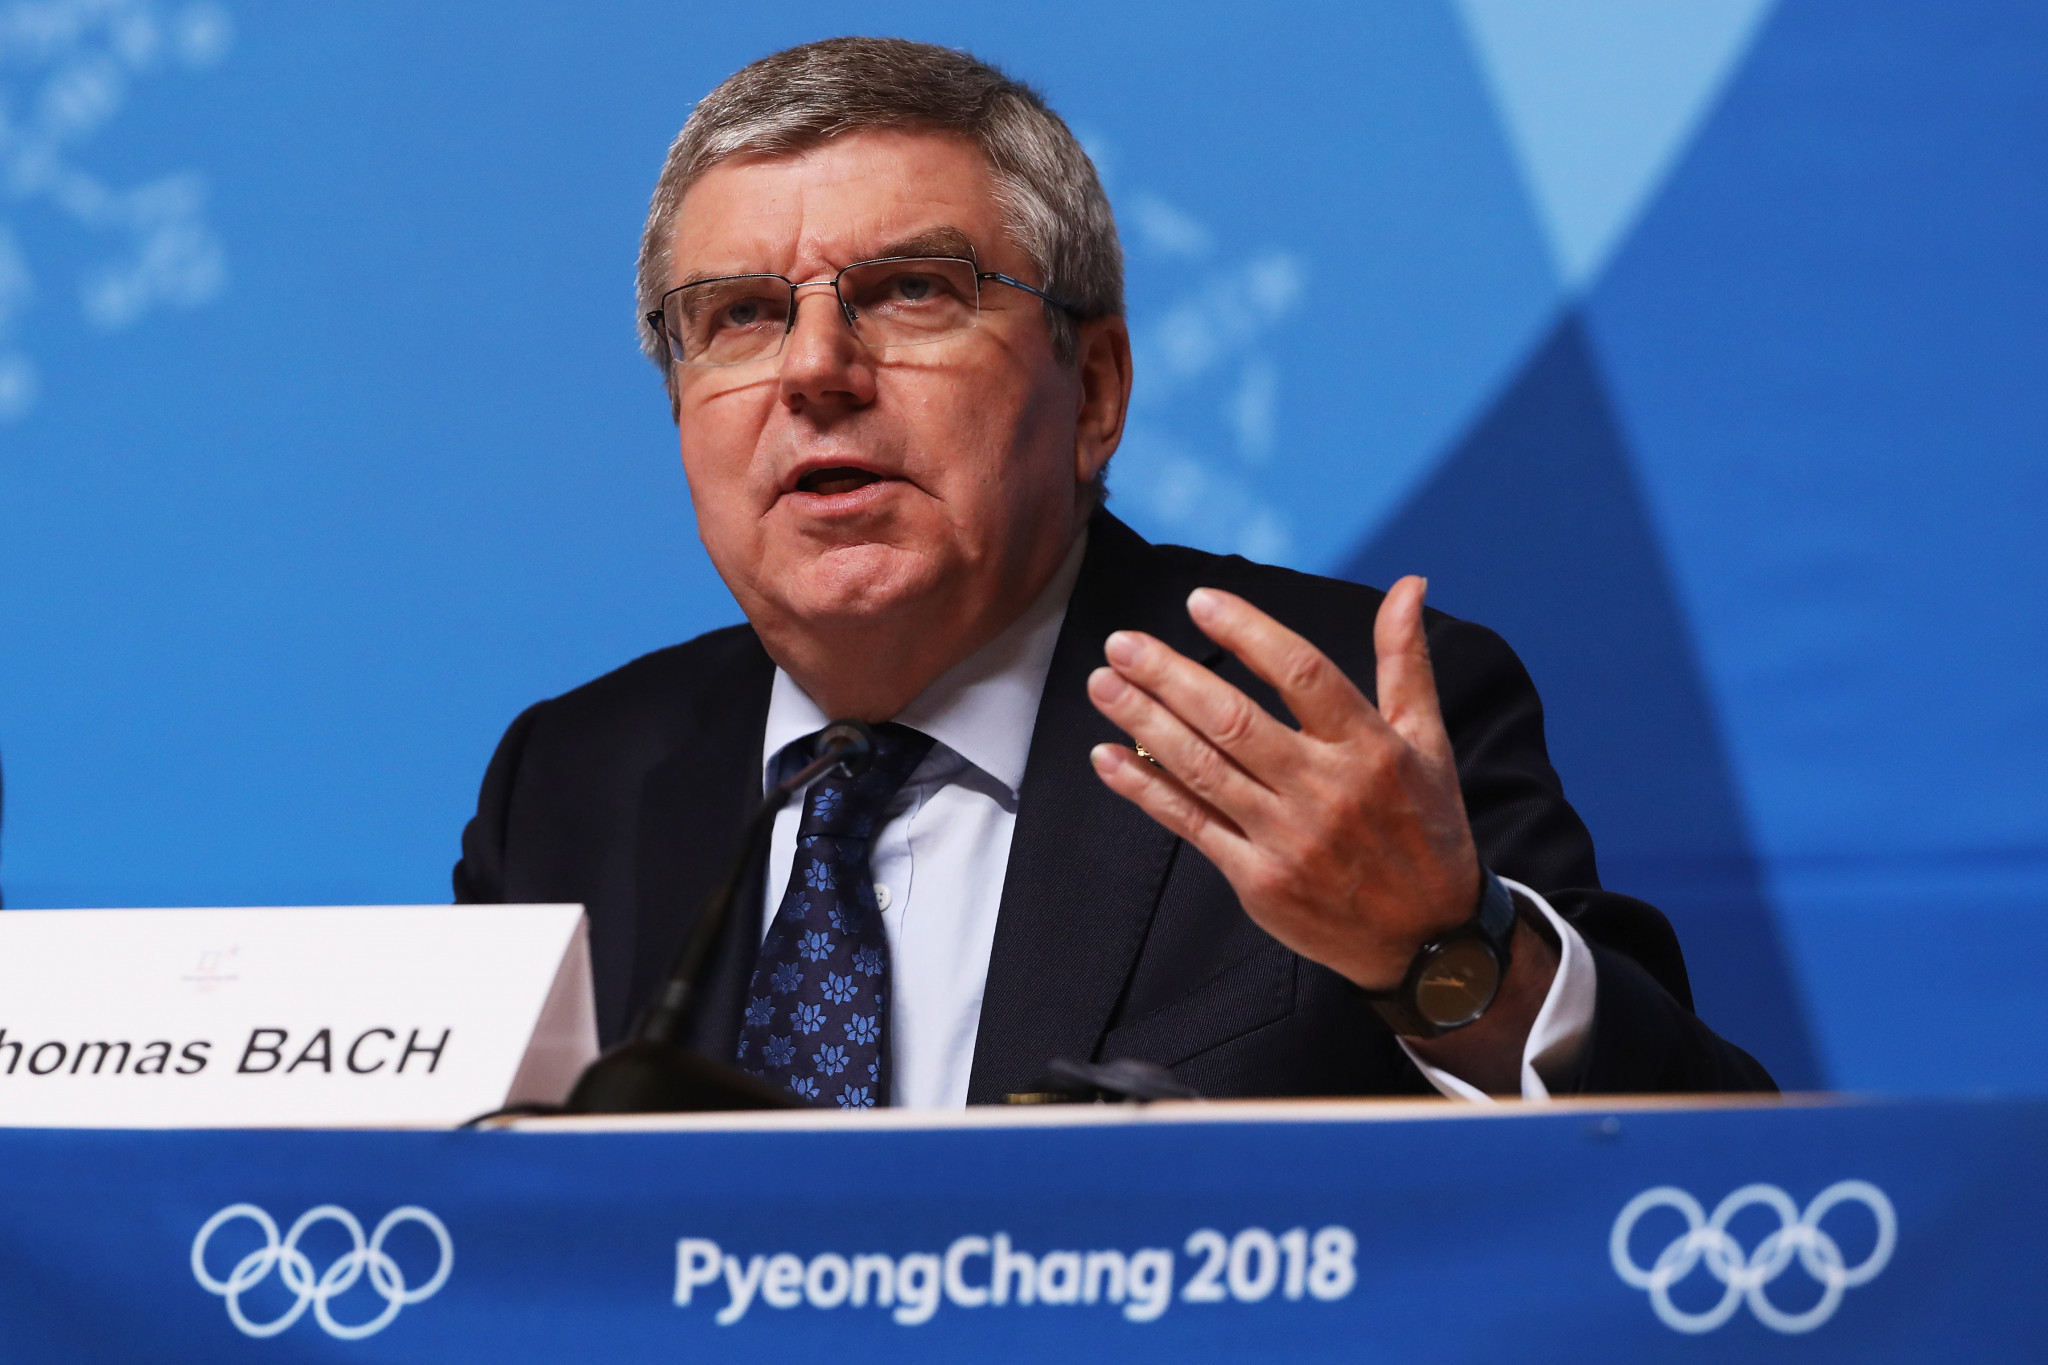 IOC President Thomas Bach has expressed concerns about Olympic boxing judging ©Getty Images